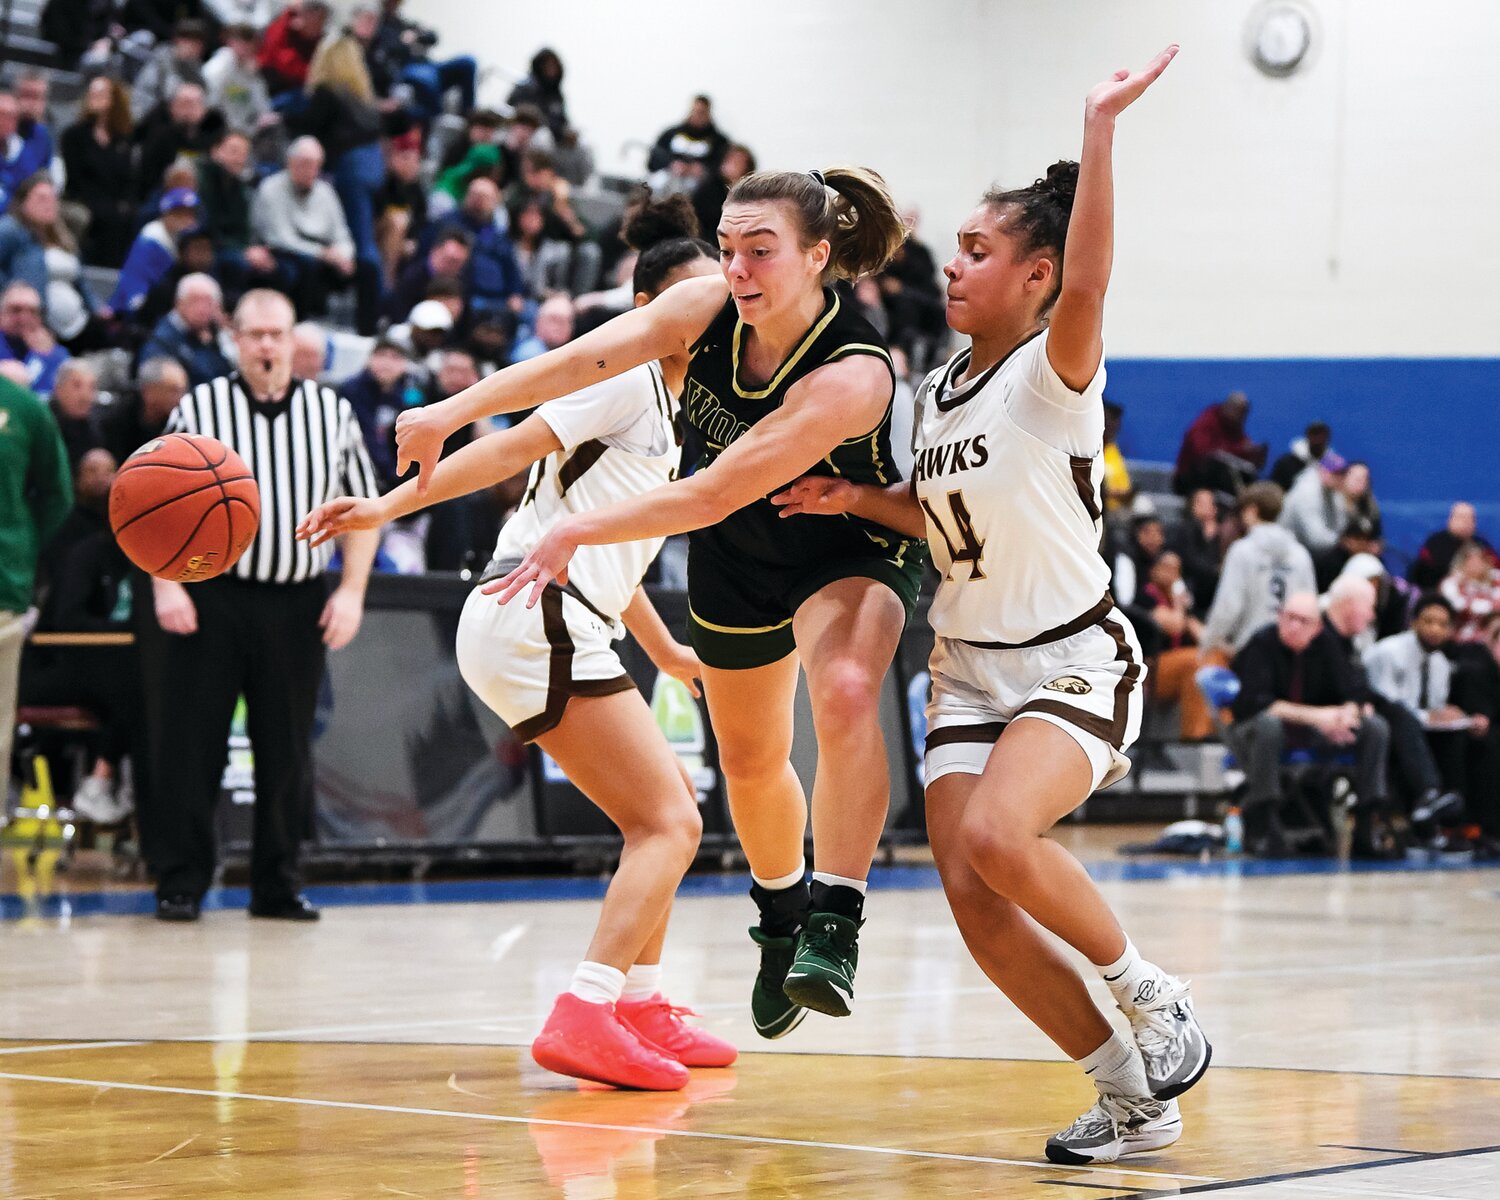 Archbishop Wood’s Ava Renninger with a no-look pass in between the double team of Bethlehem Catholic’s Daviana Jones and Aliyah Brame.